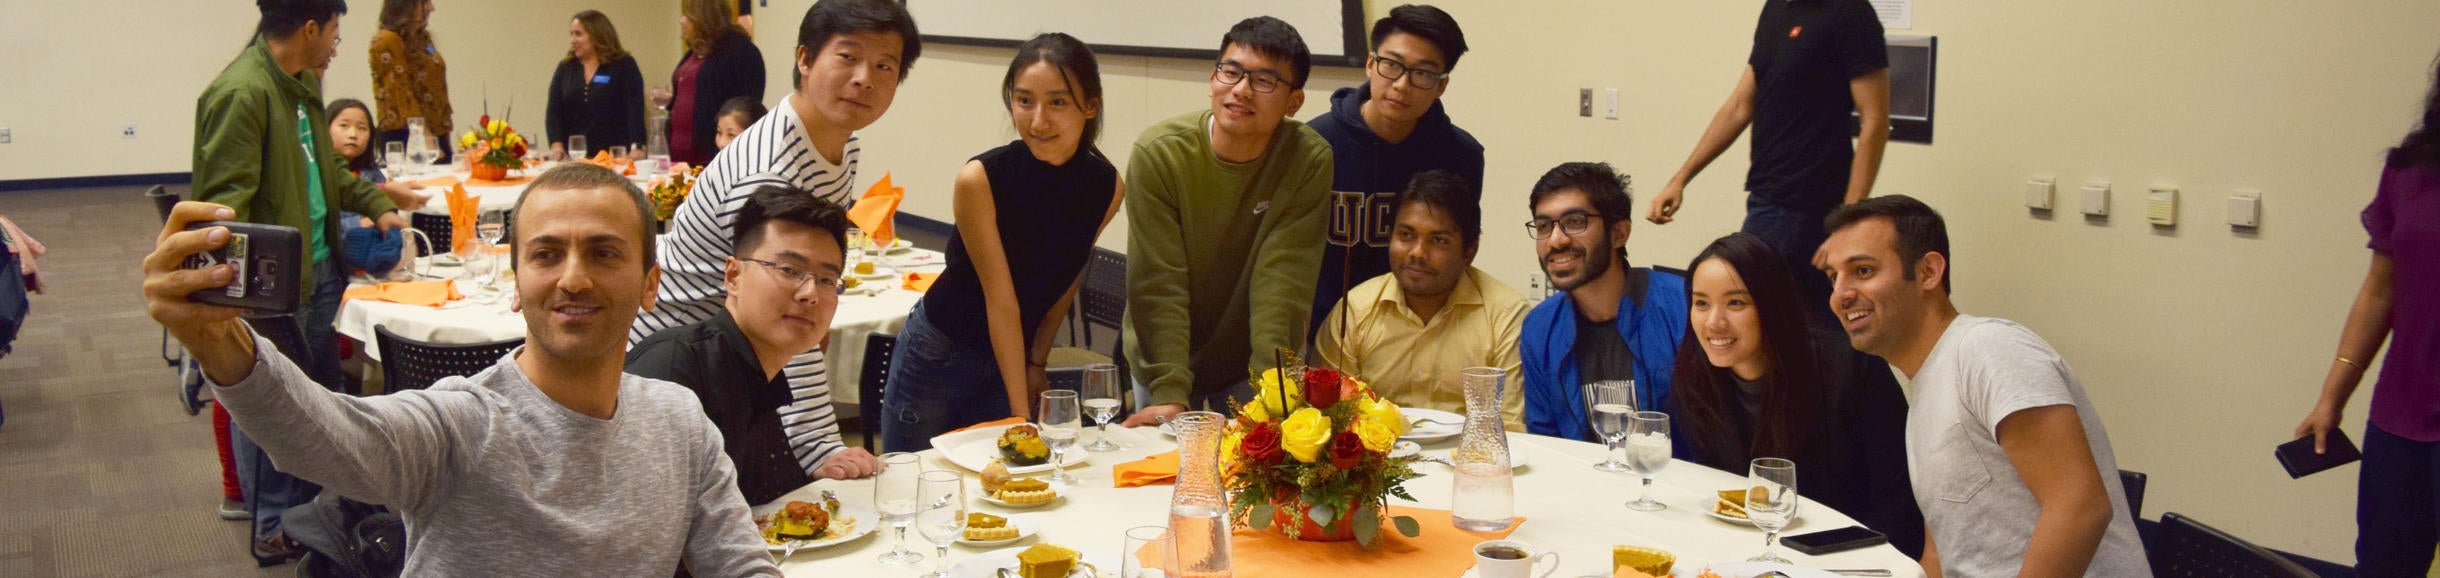 Group of students and scholars taking selfie at thanksgiving table